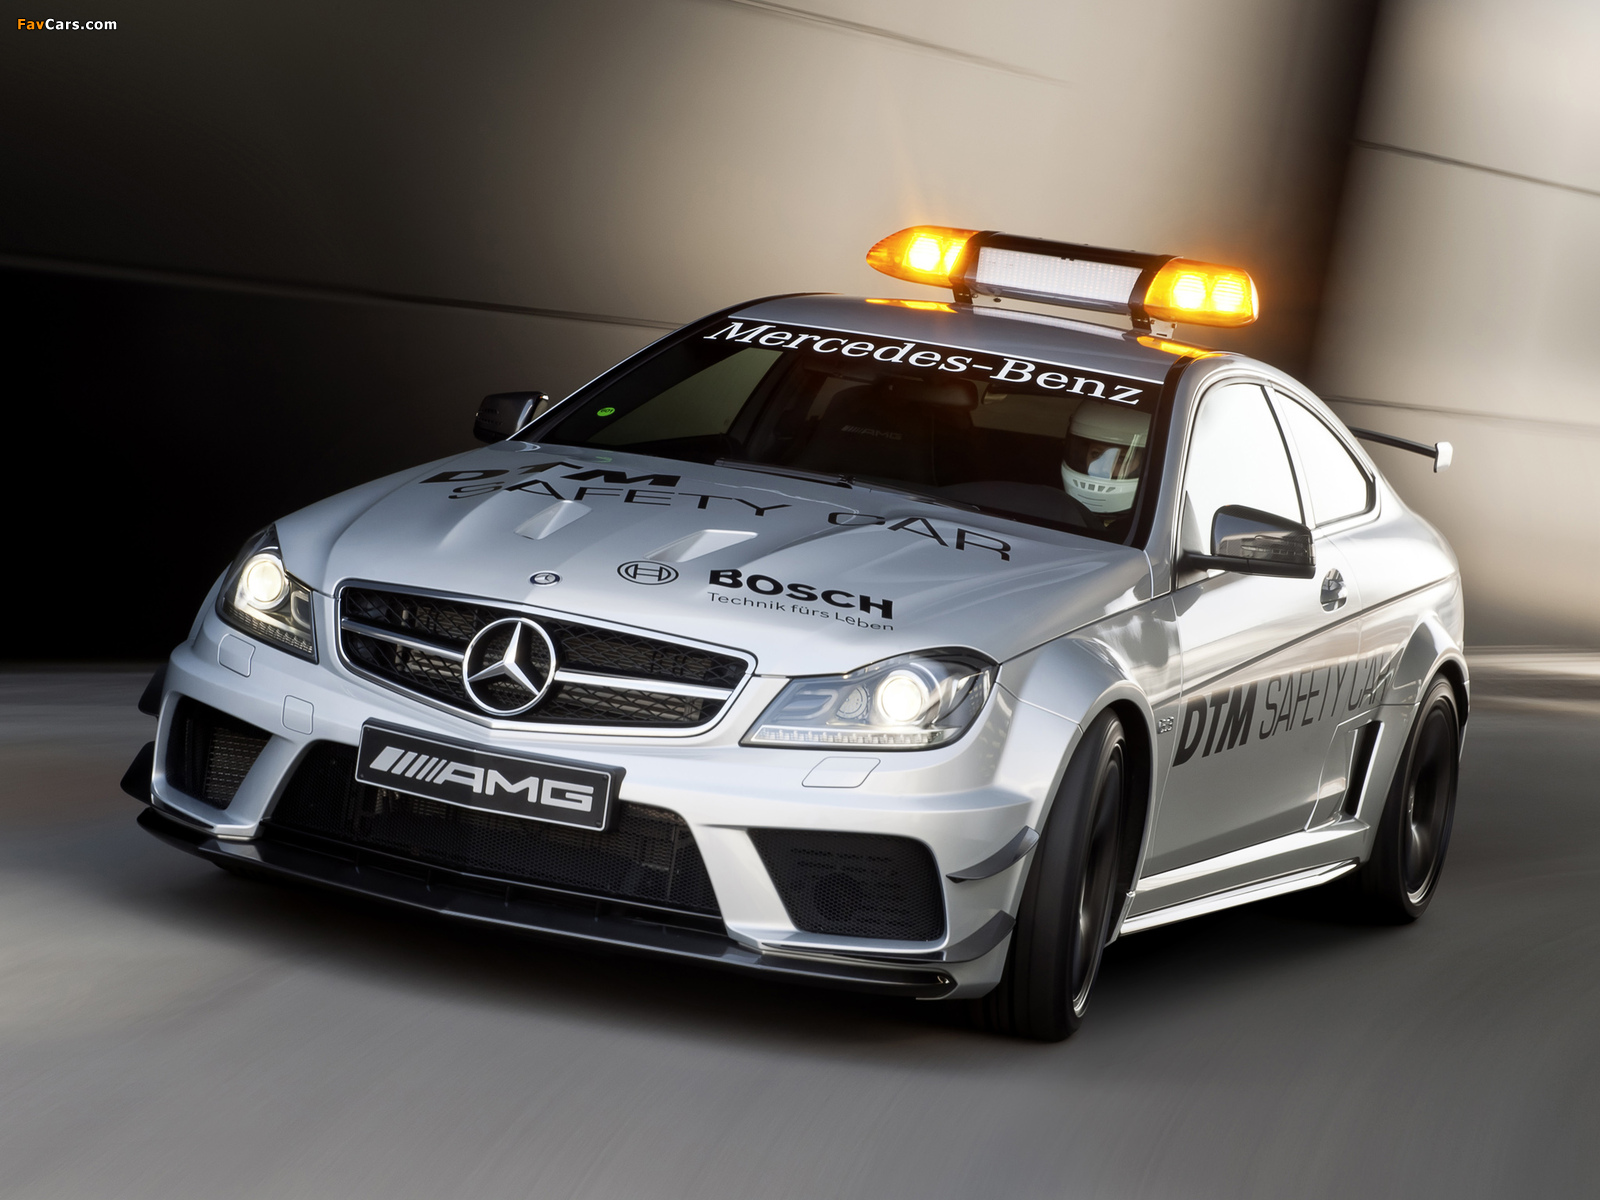 Mercedes-Benz C 63 AMG Black Series Coupe DTM Safety Car (C204) 2012 pictures (1600 x 1200)